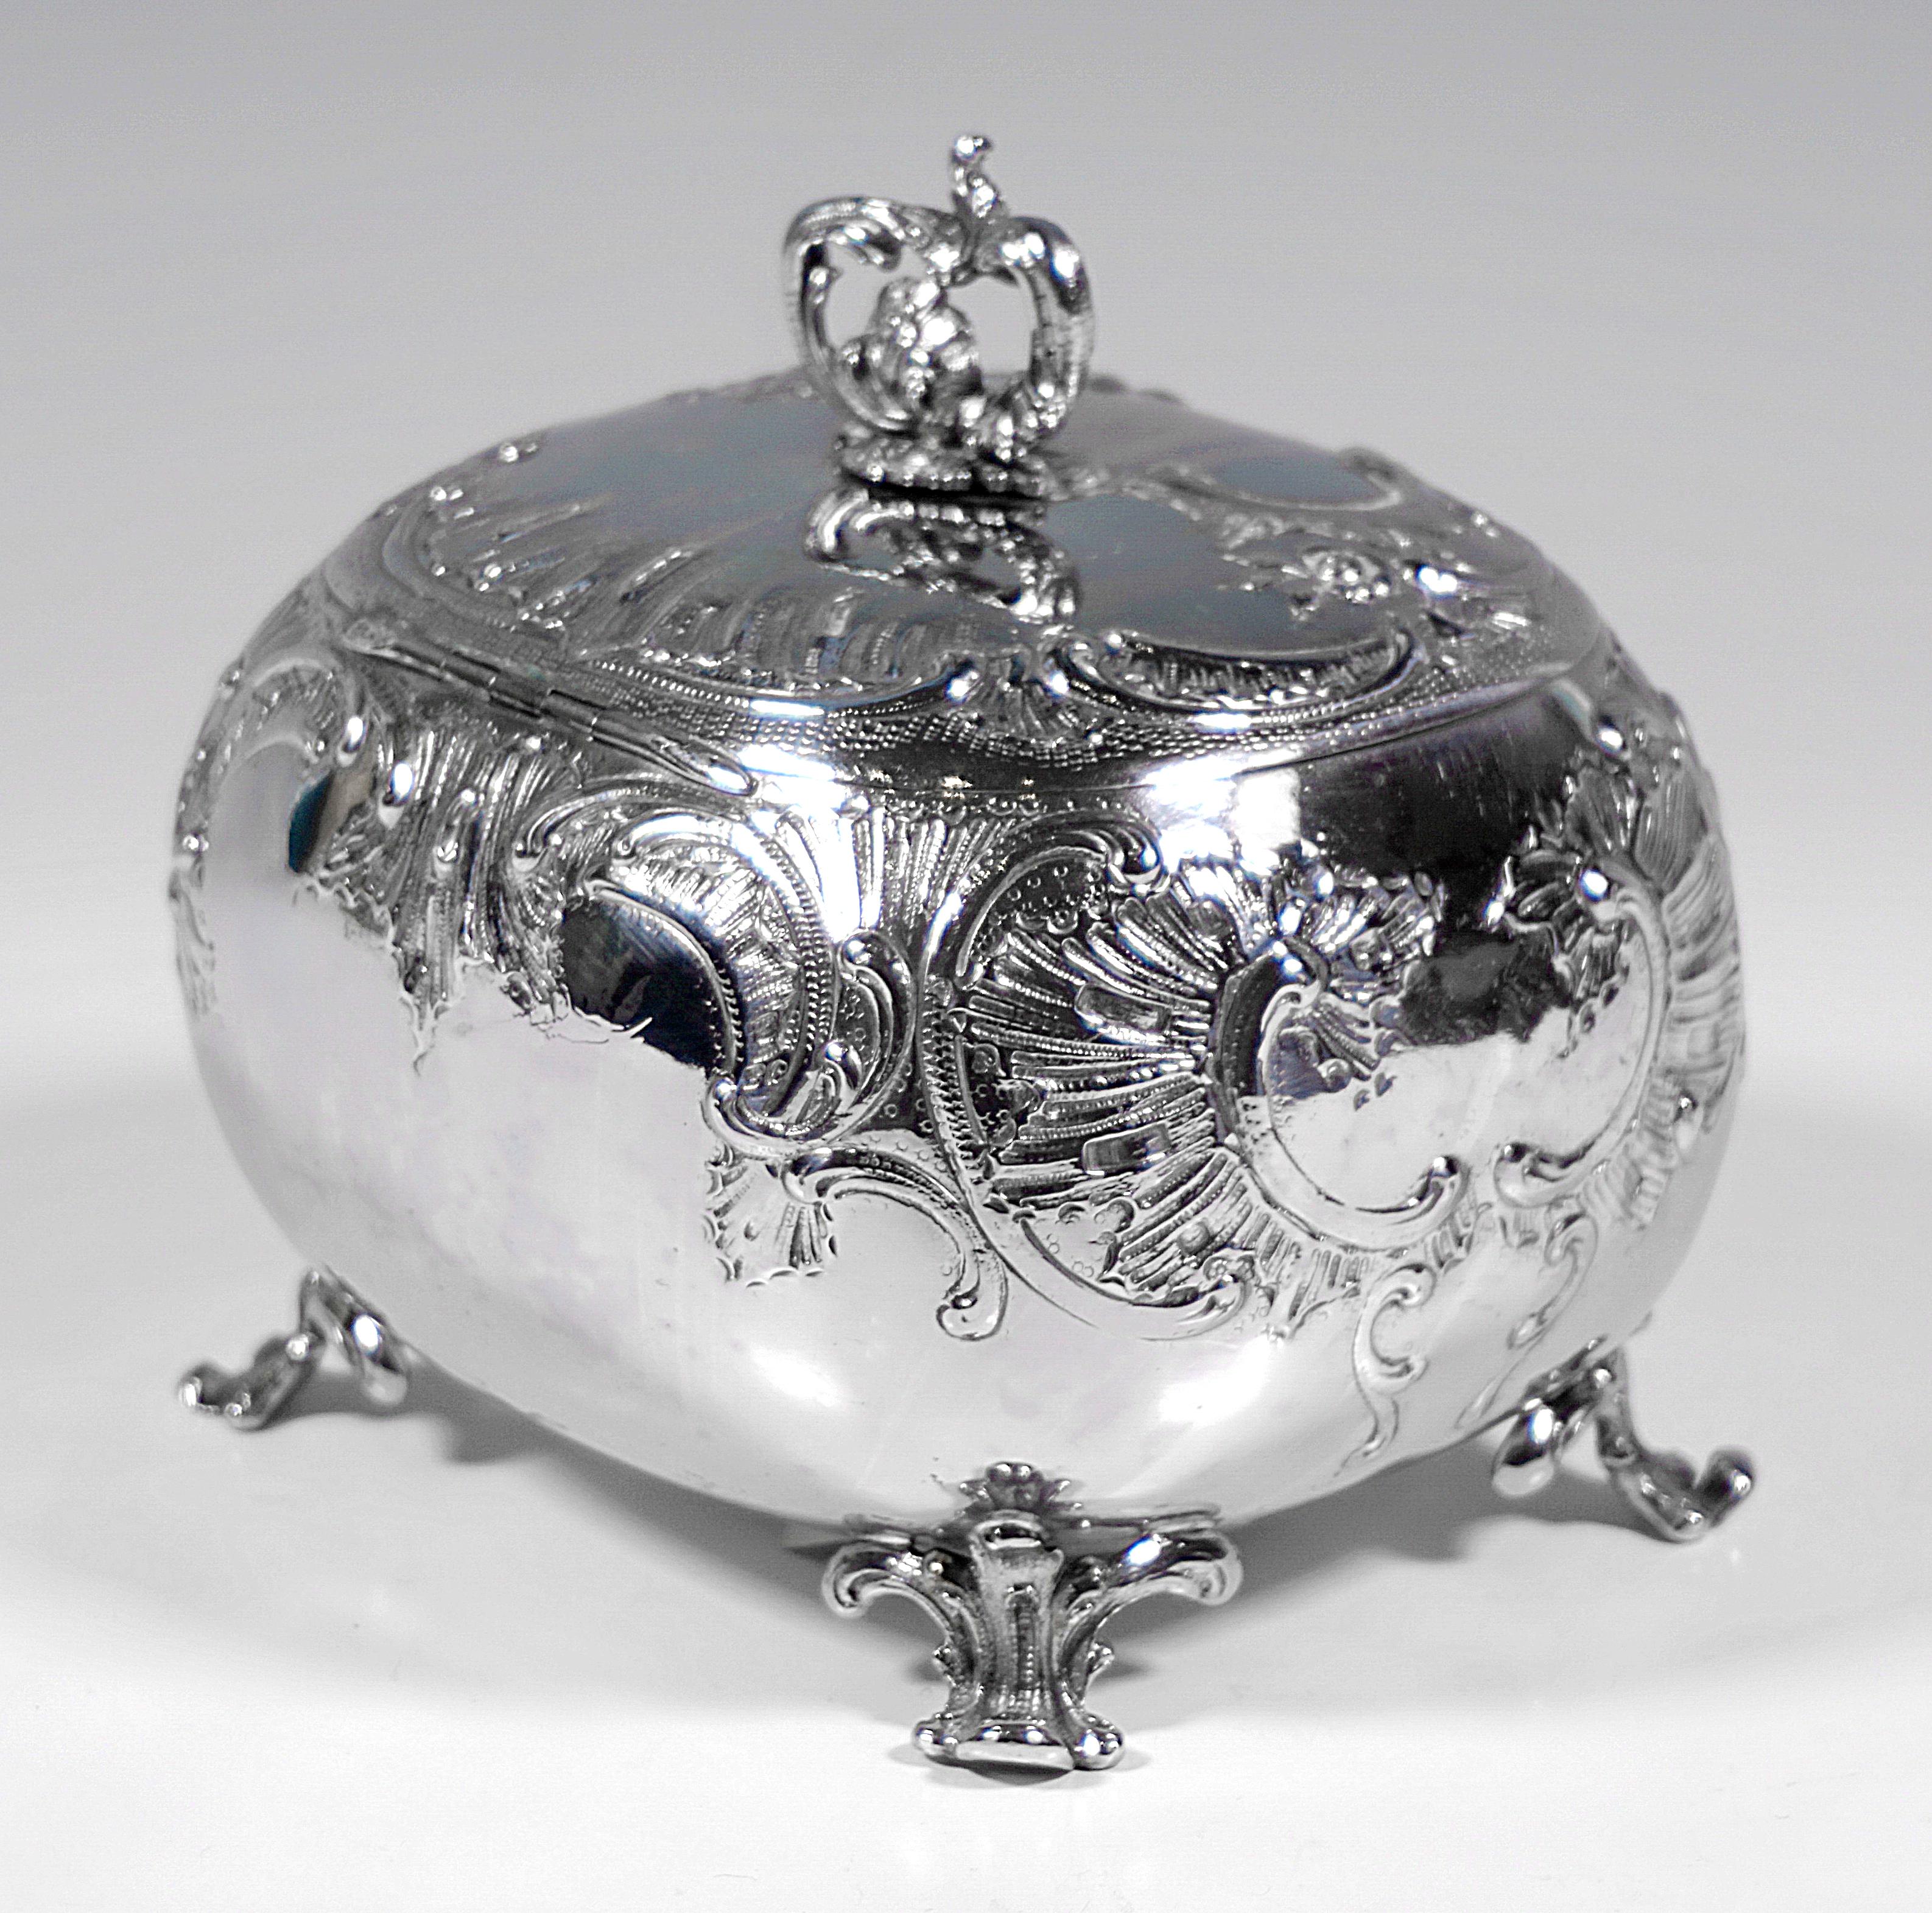 Art Nouveau sugar bowl of oval, rounded form, standing on four rocaille feet, rocaille decoration in relief on the wall and hinged lid, sculpted, towering rocaille volutes forming a handle, discreet monogram, key present.

Hallmarks:
- Diana's head